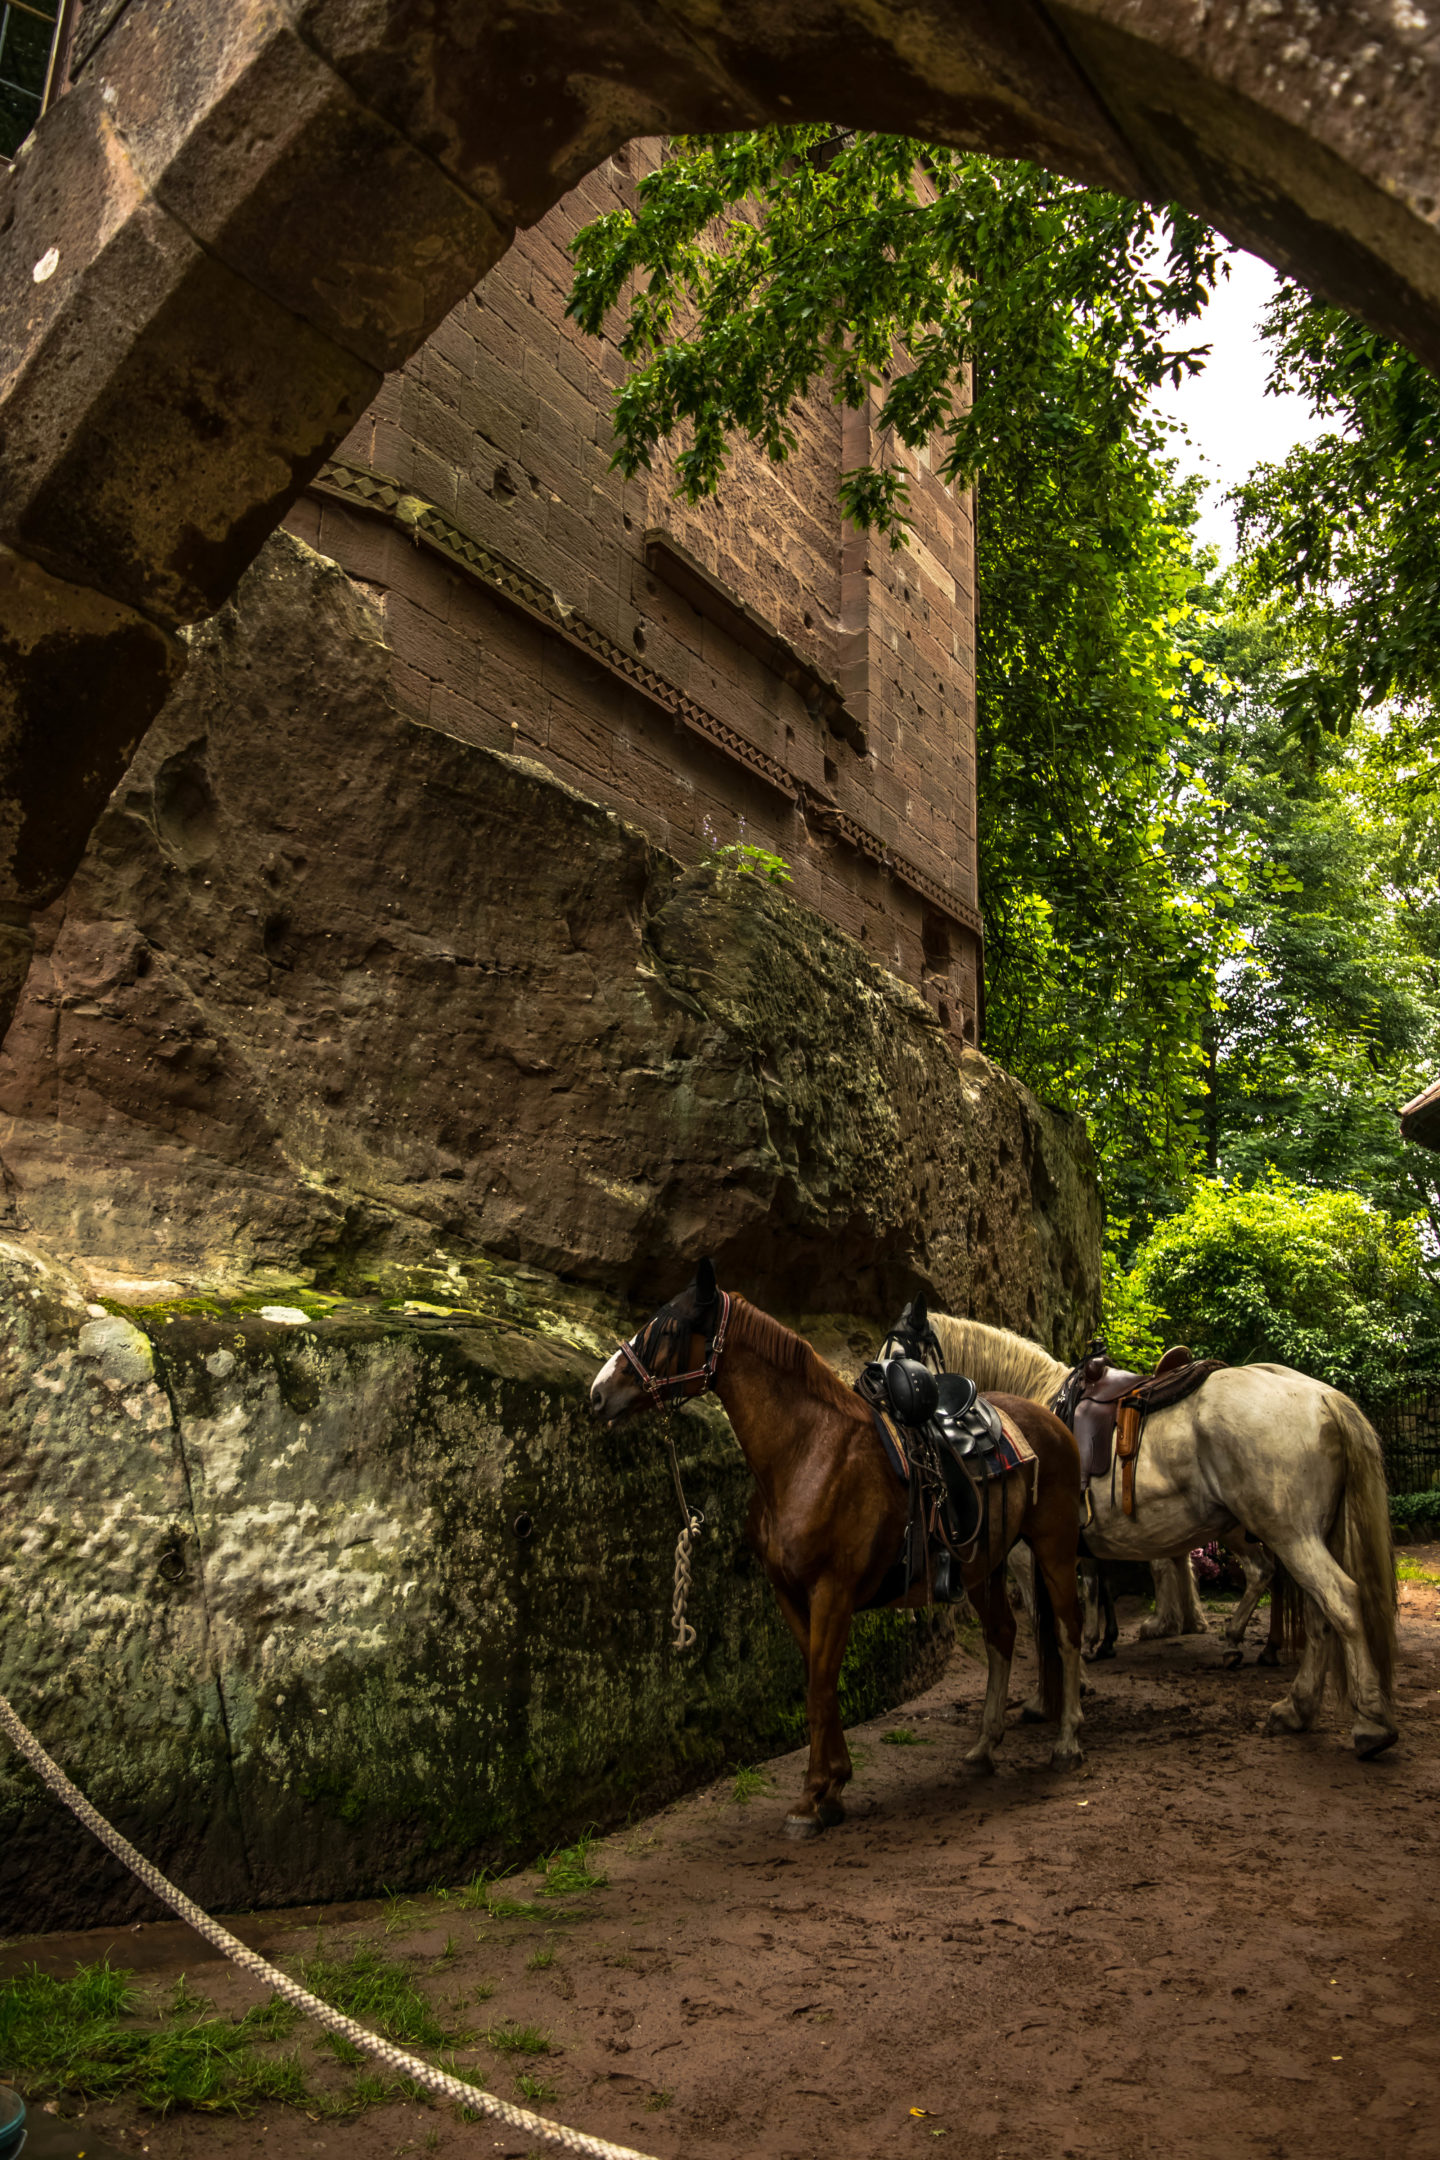 Local equestrians were going through a ride for the forest, and their horses tied up here looked so picturesque. 